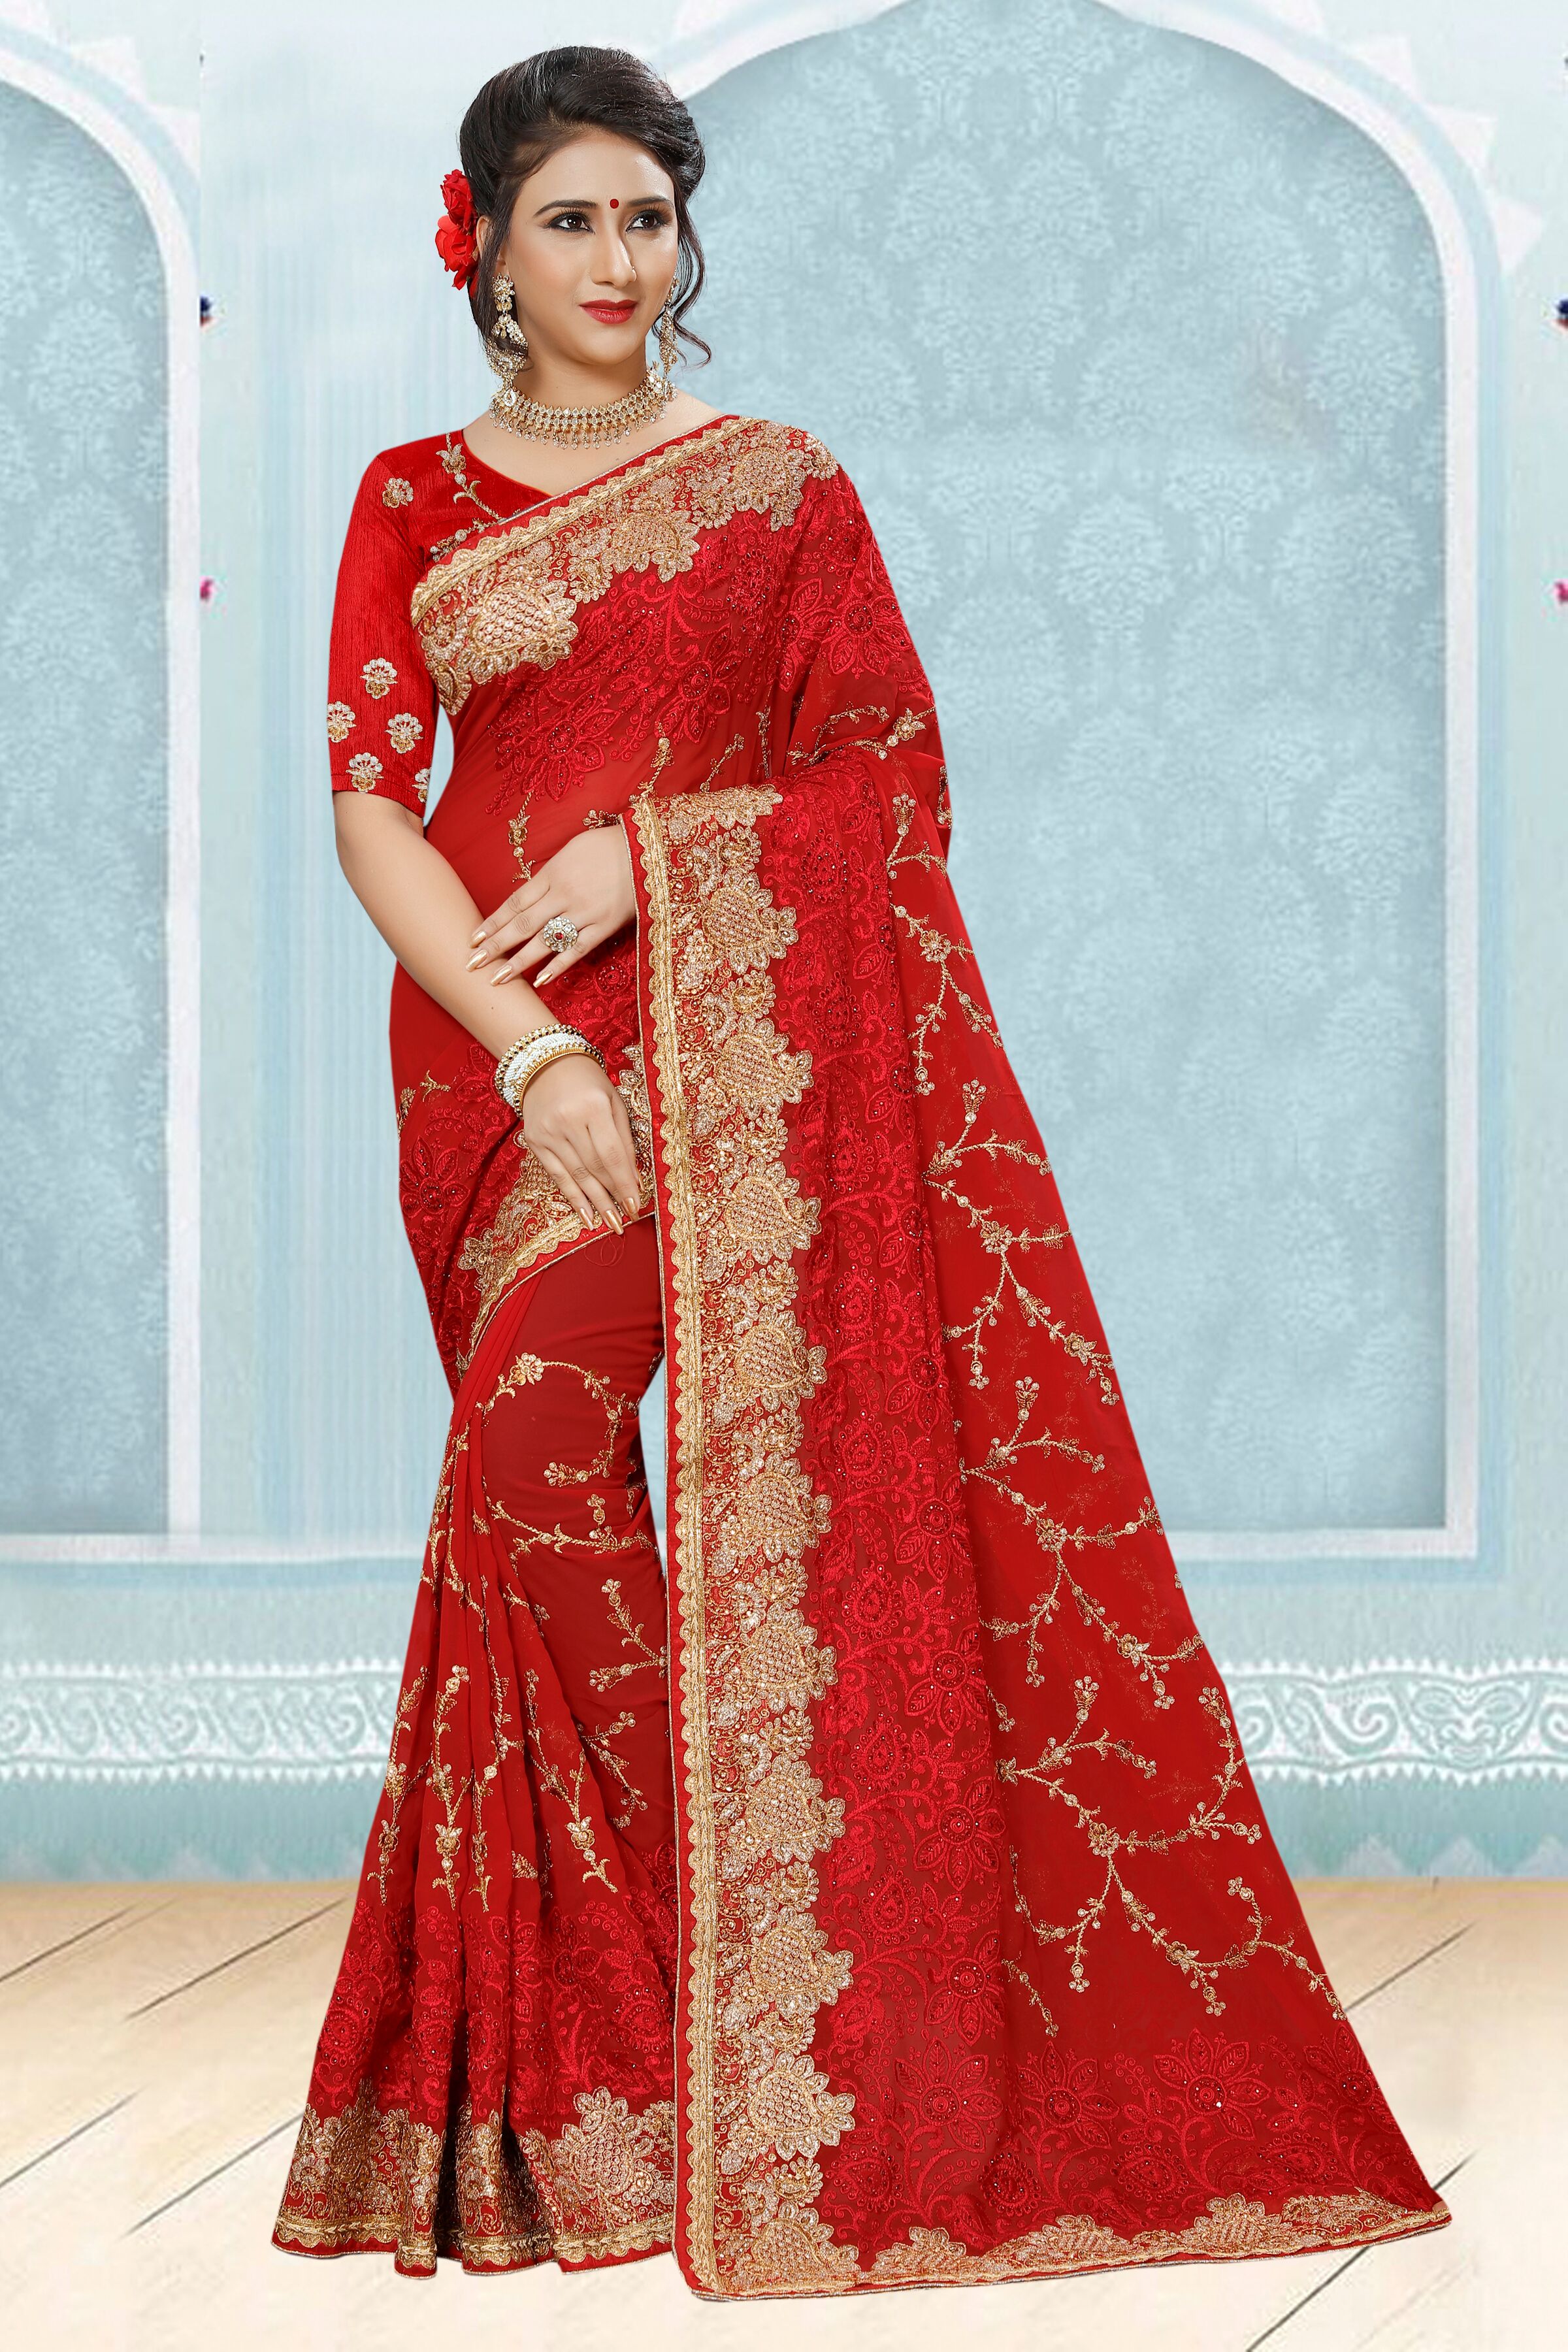 Enhance Your Personality Wearing This Heavy Embroidered Designer Saree